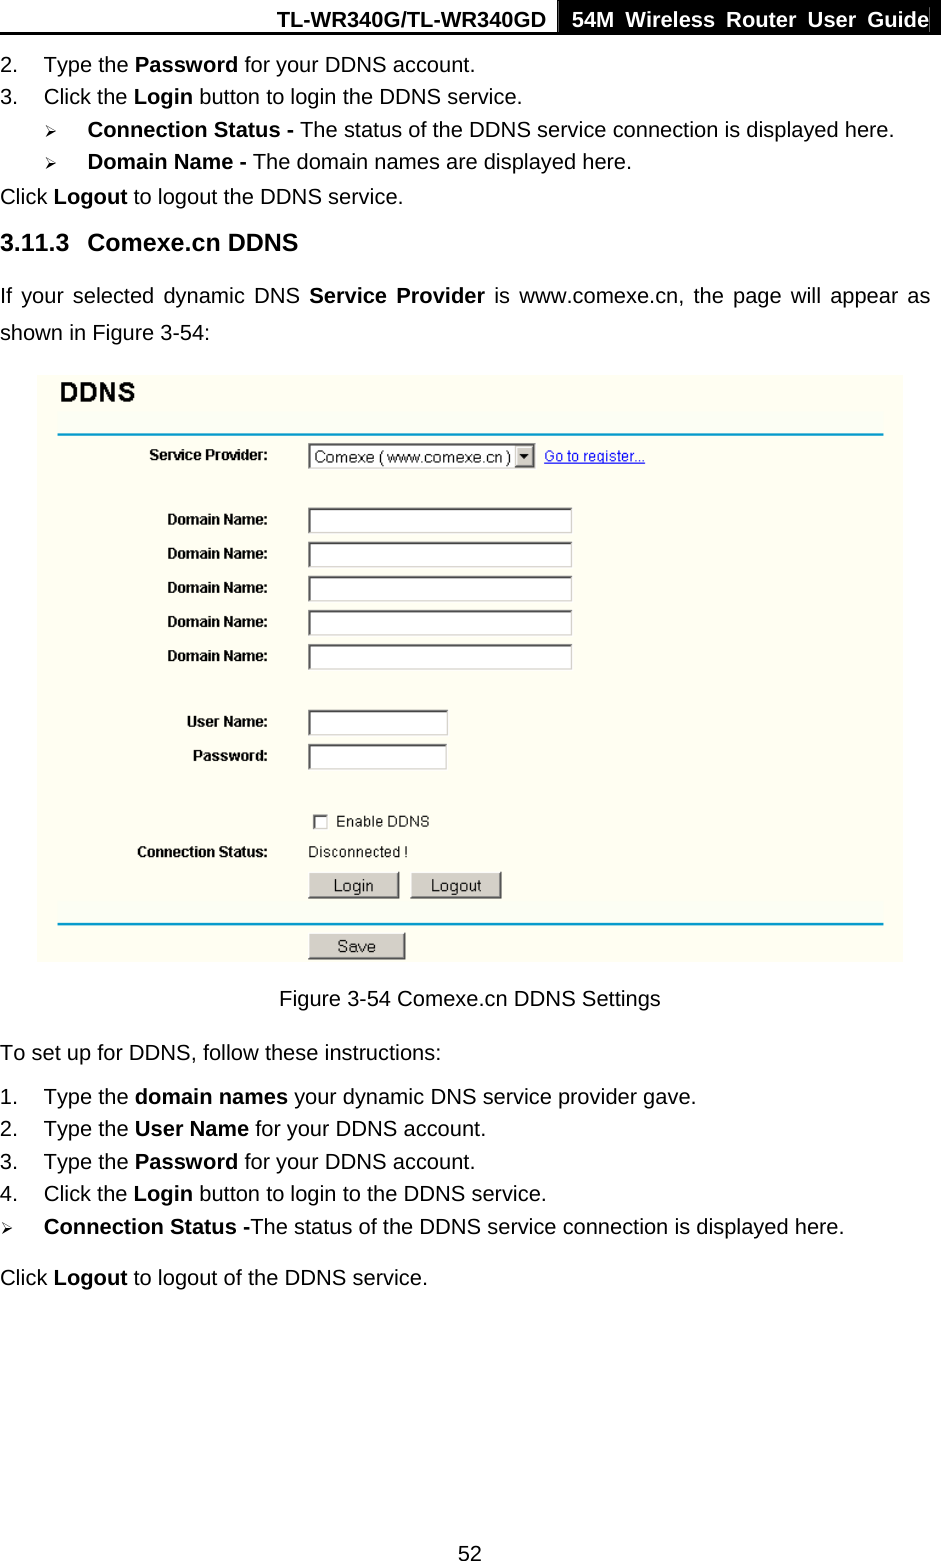 TL-WR340G/TL-WR340GD 54M Wireless Router User Guide  522. Type the Password for your DDNS account.   3. Click the Login button to login the DDNS service.   ¾ Connection Status - The status of the DDNS service connection is displayed here. ¾ Domain Name - The domain names are displayed here. Click Logout to logout the DDNS service. 3.11.3 Comexe.cn DDNS If your selected dynamic DNS Service Provider is www.comexe.cn, the page will appear as shown in Figure 3-54:  Figure 3-54 Comexe.cn DDNS Settings To set up for DDNS, follow these instructions: 1. Type the domain names your dynamic DNS service provider gave.   2. Type the User Name for your DDNS account.   3. Type the Password for your DDNS account.   4. Click the Login button to login to the DDNS service. ¾ Connection Status -The status of the DDNS service connection is displayed here. Click Logout to logout of the DDNS service. 